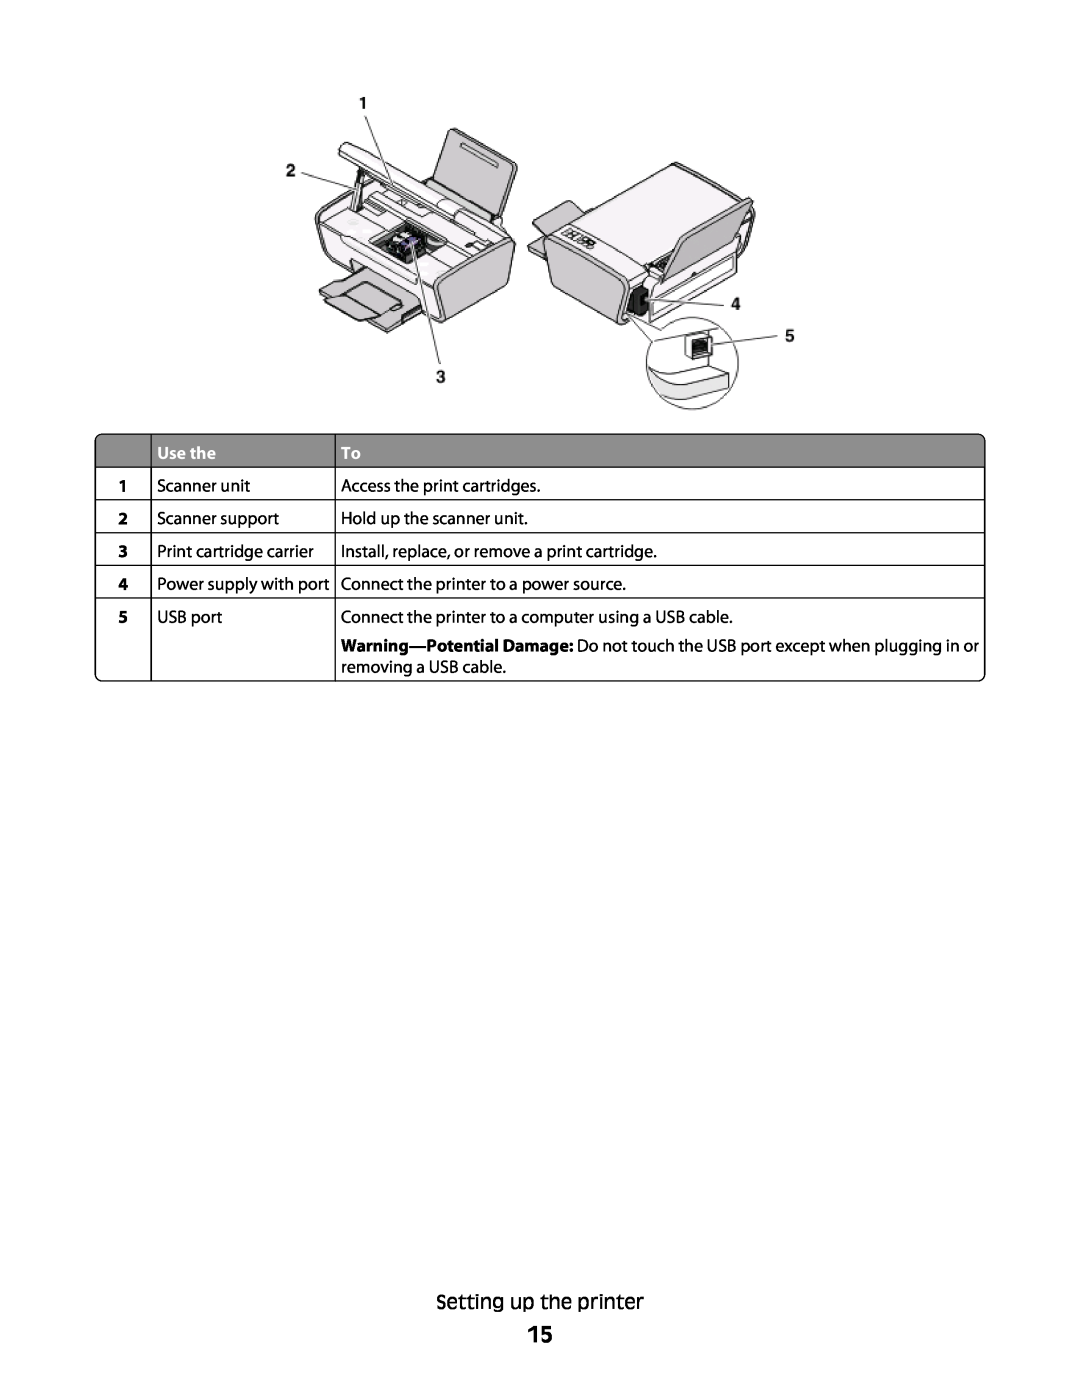 Lexmark 4445, 4433 manual Setting up the printer, Use the, Scanner unit Scanner support Print cartridge carrier 